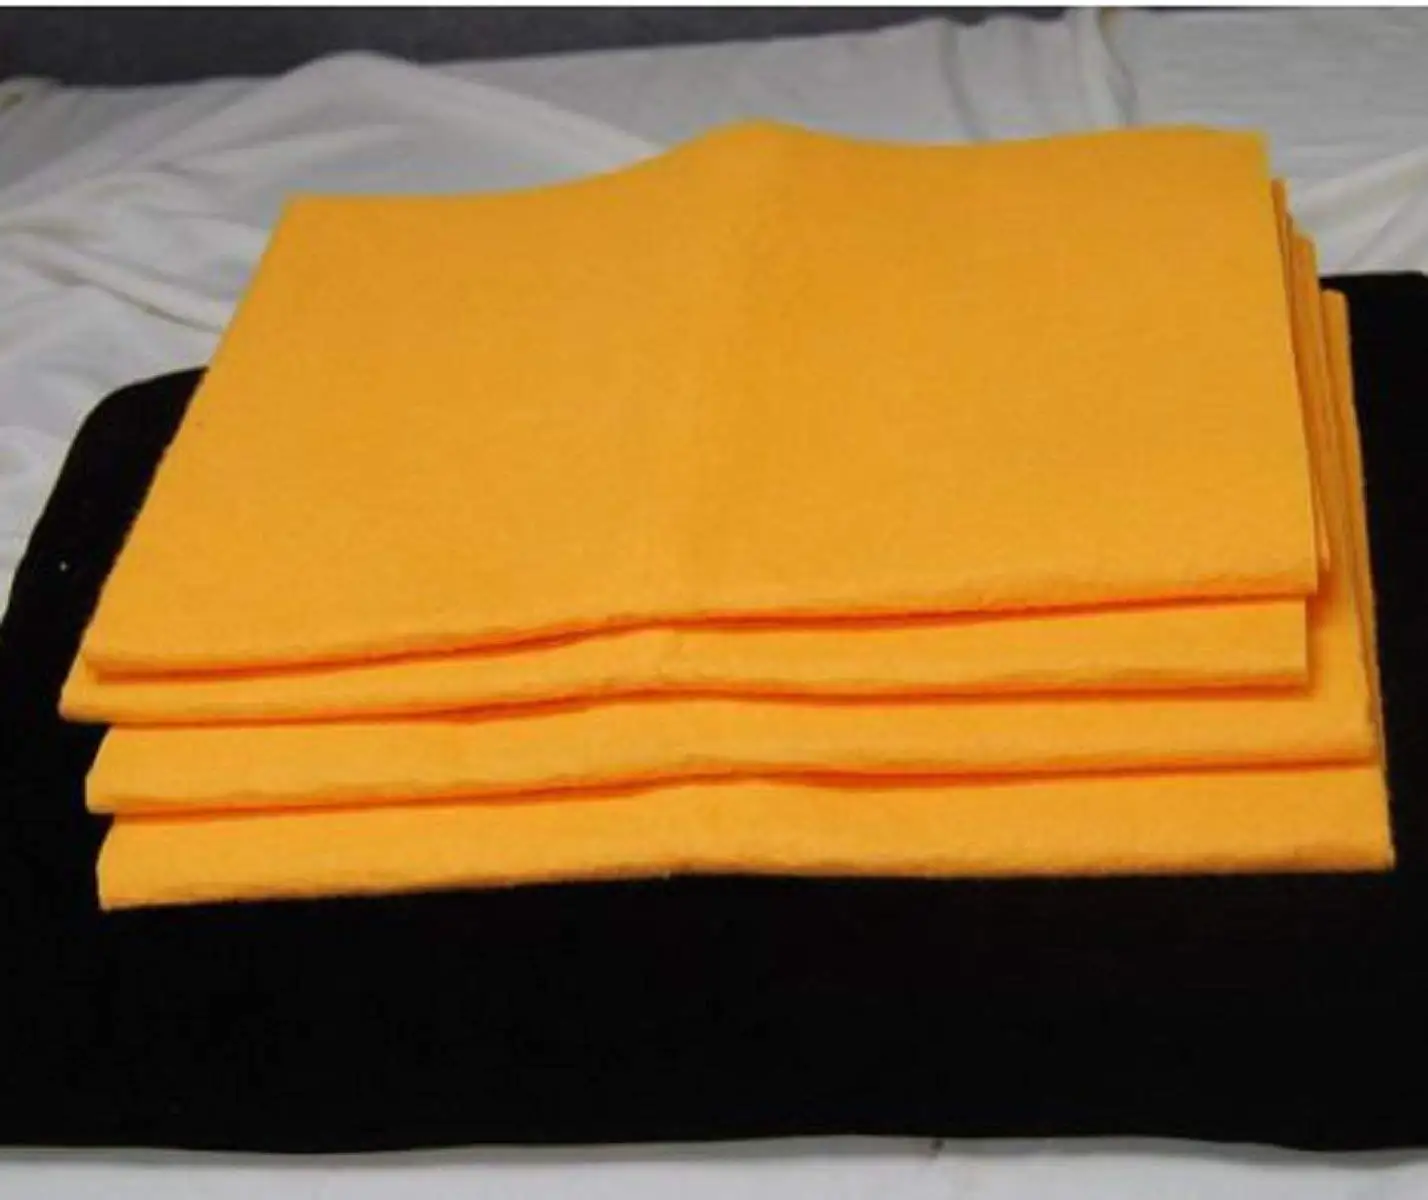 Buy Quantities of "The Shammy!" Large Super Cleaning Cloth ...